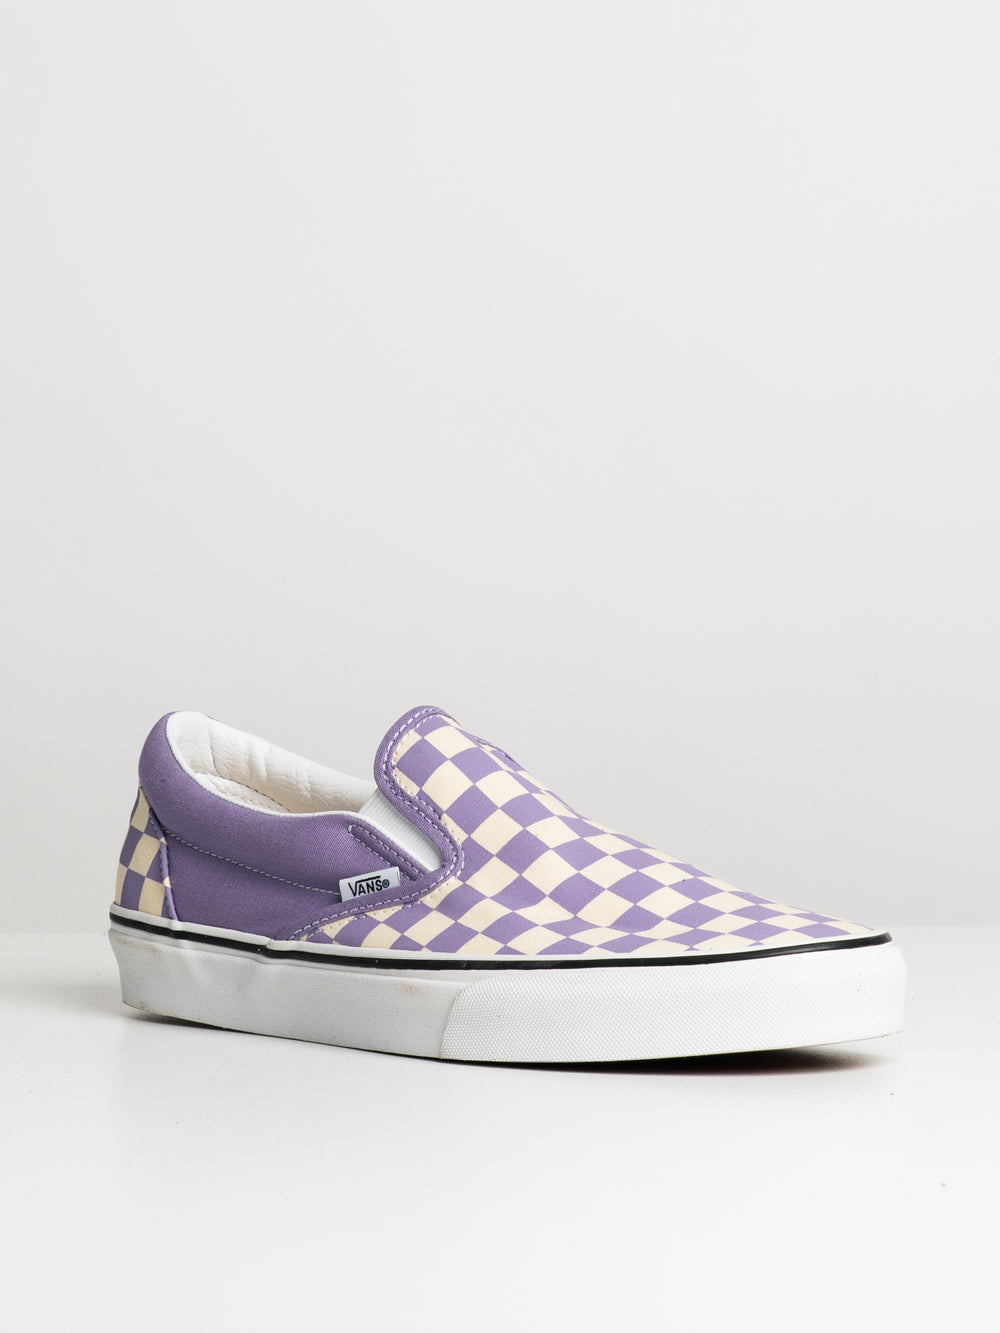 WOMENS VANS CLASSIC SLIP-ON CHECK  - CLEARANCE